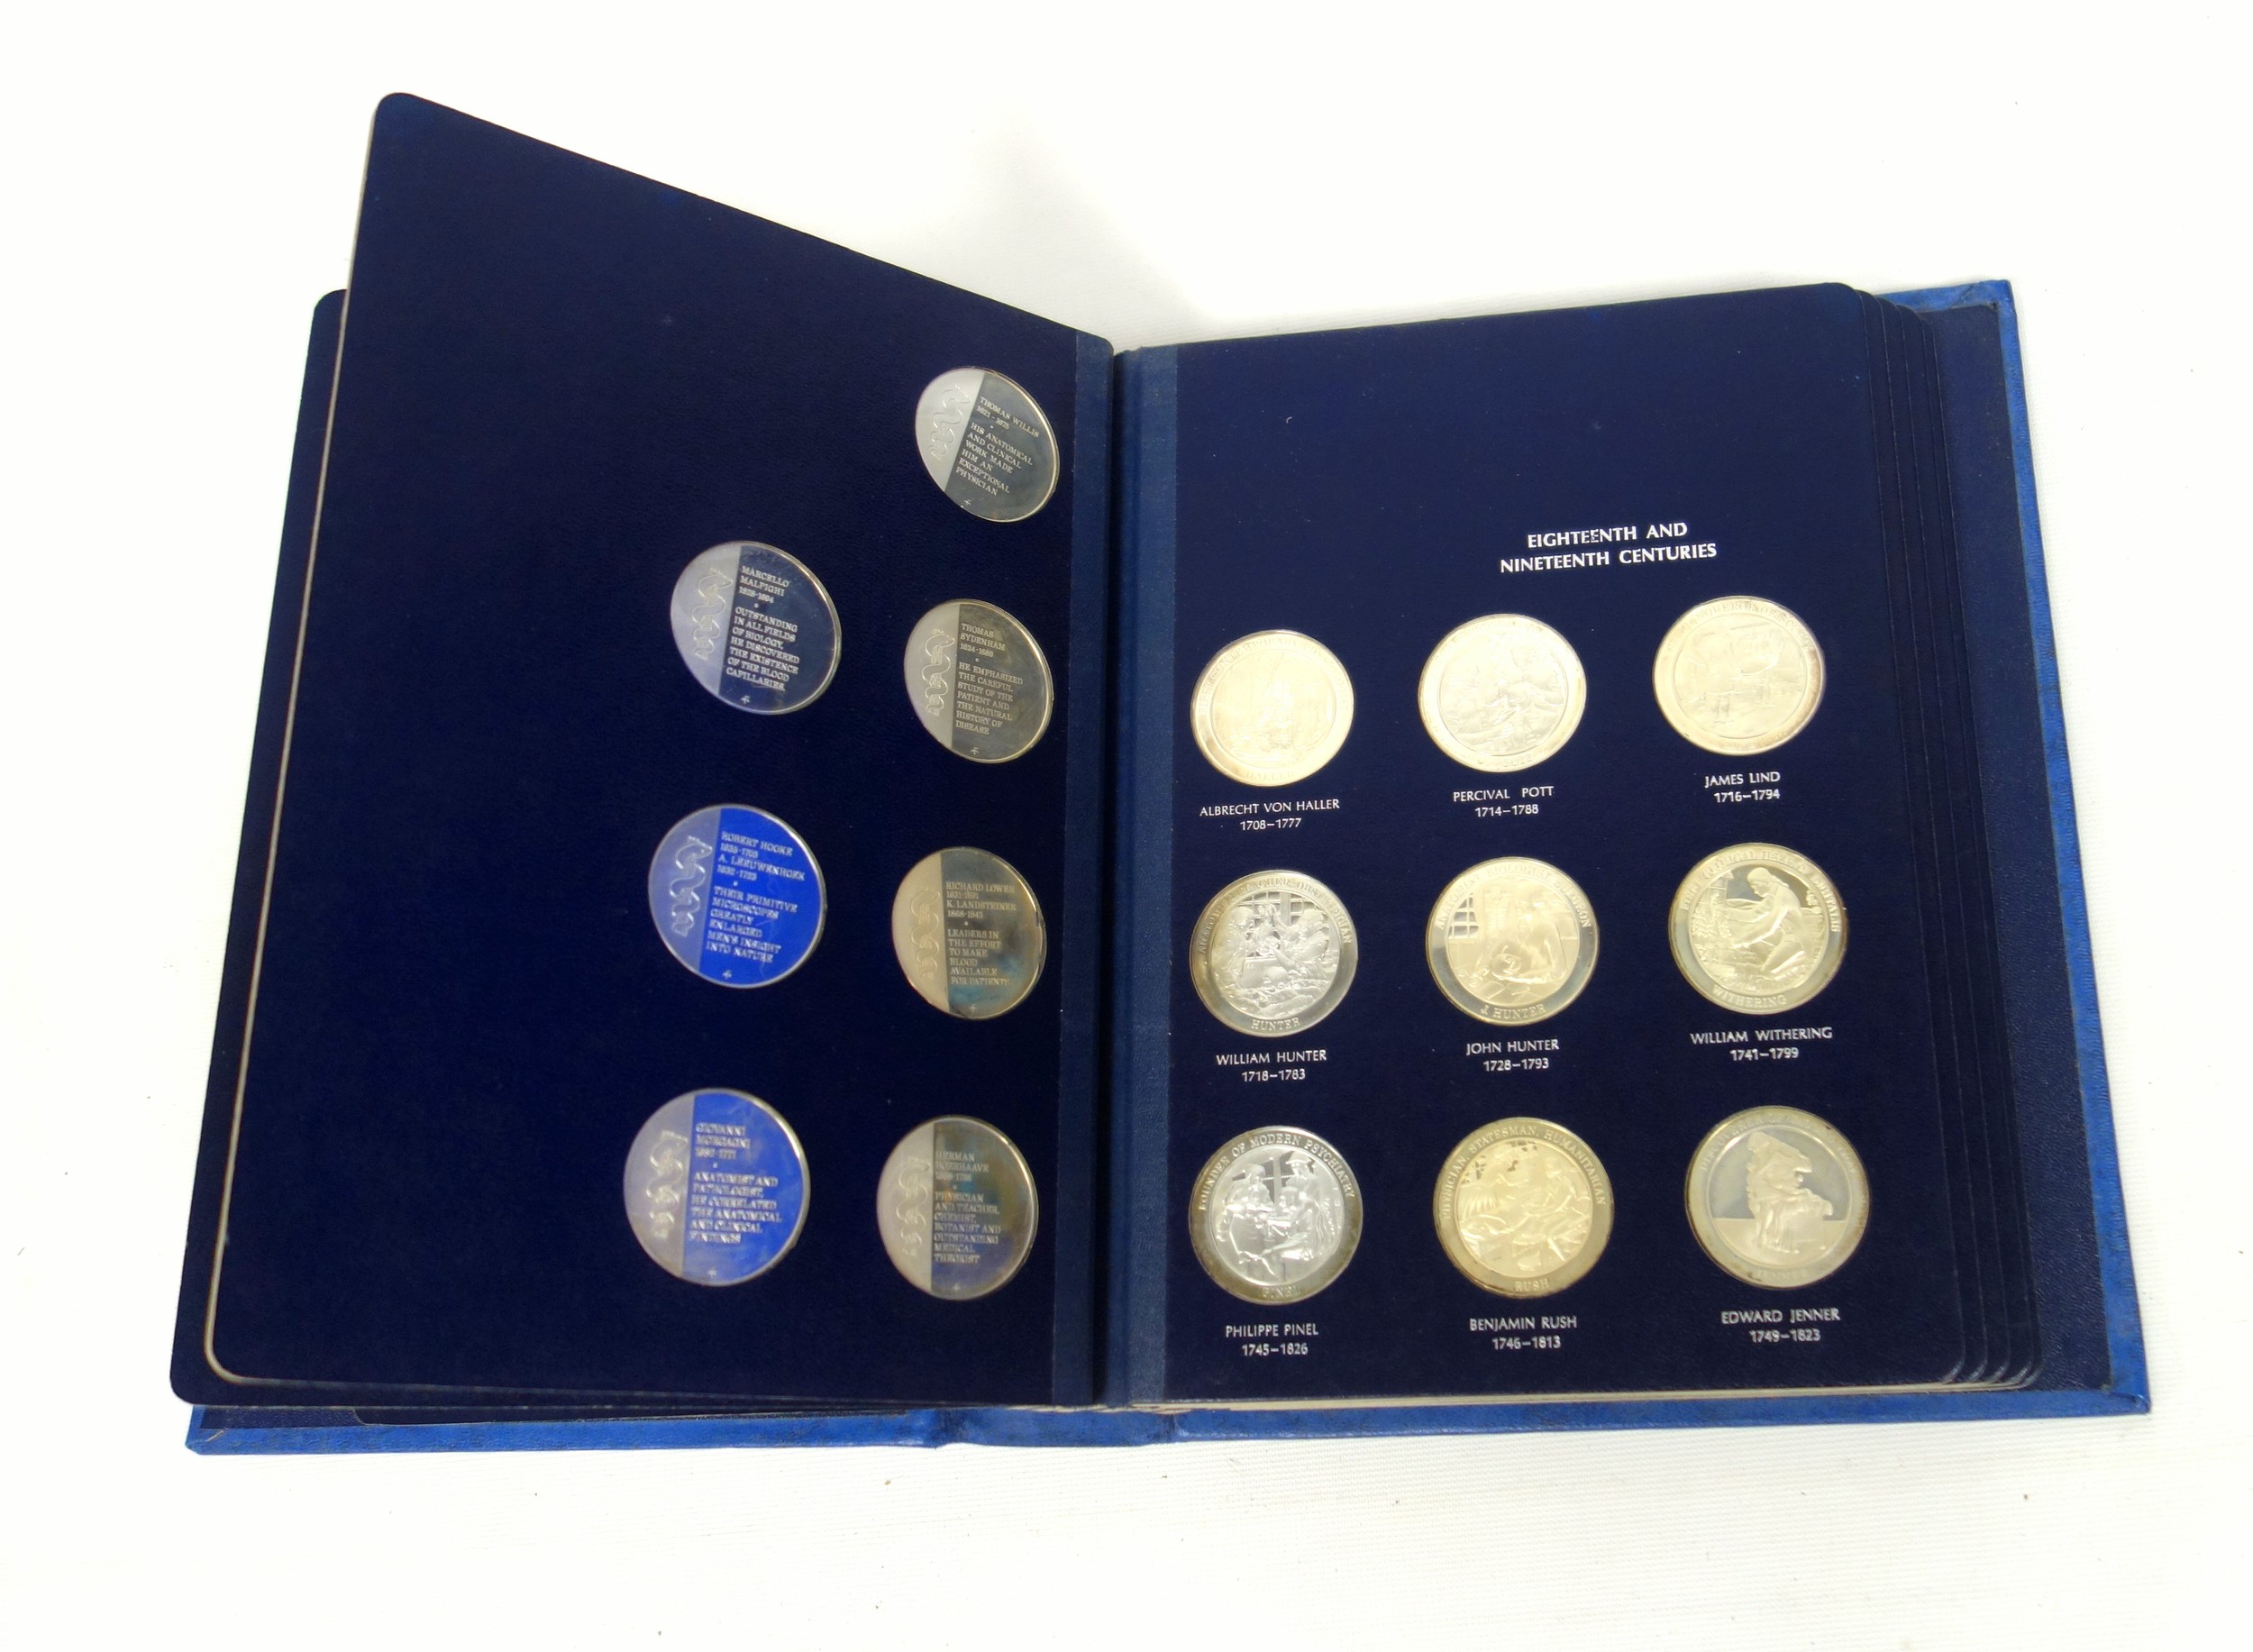 Systema Sciences Ltd. set of 66 Medallic History of Medicine silver special mint finish medals, - Image 6 of 11